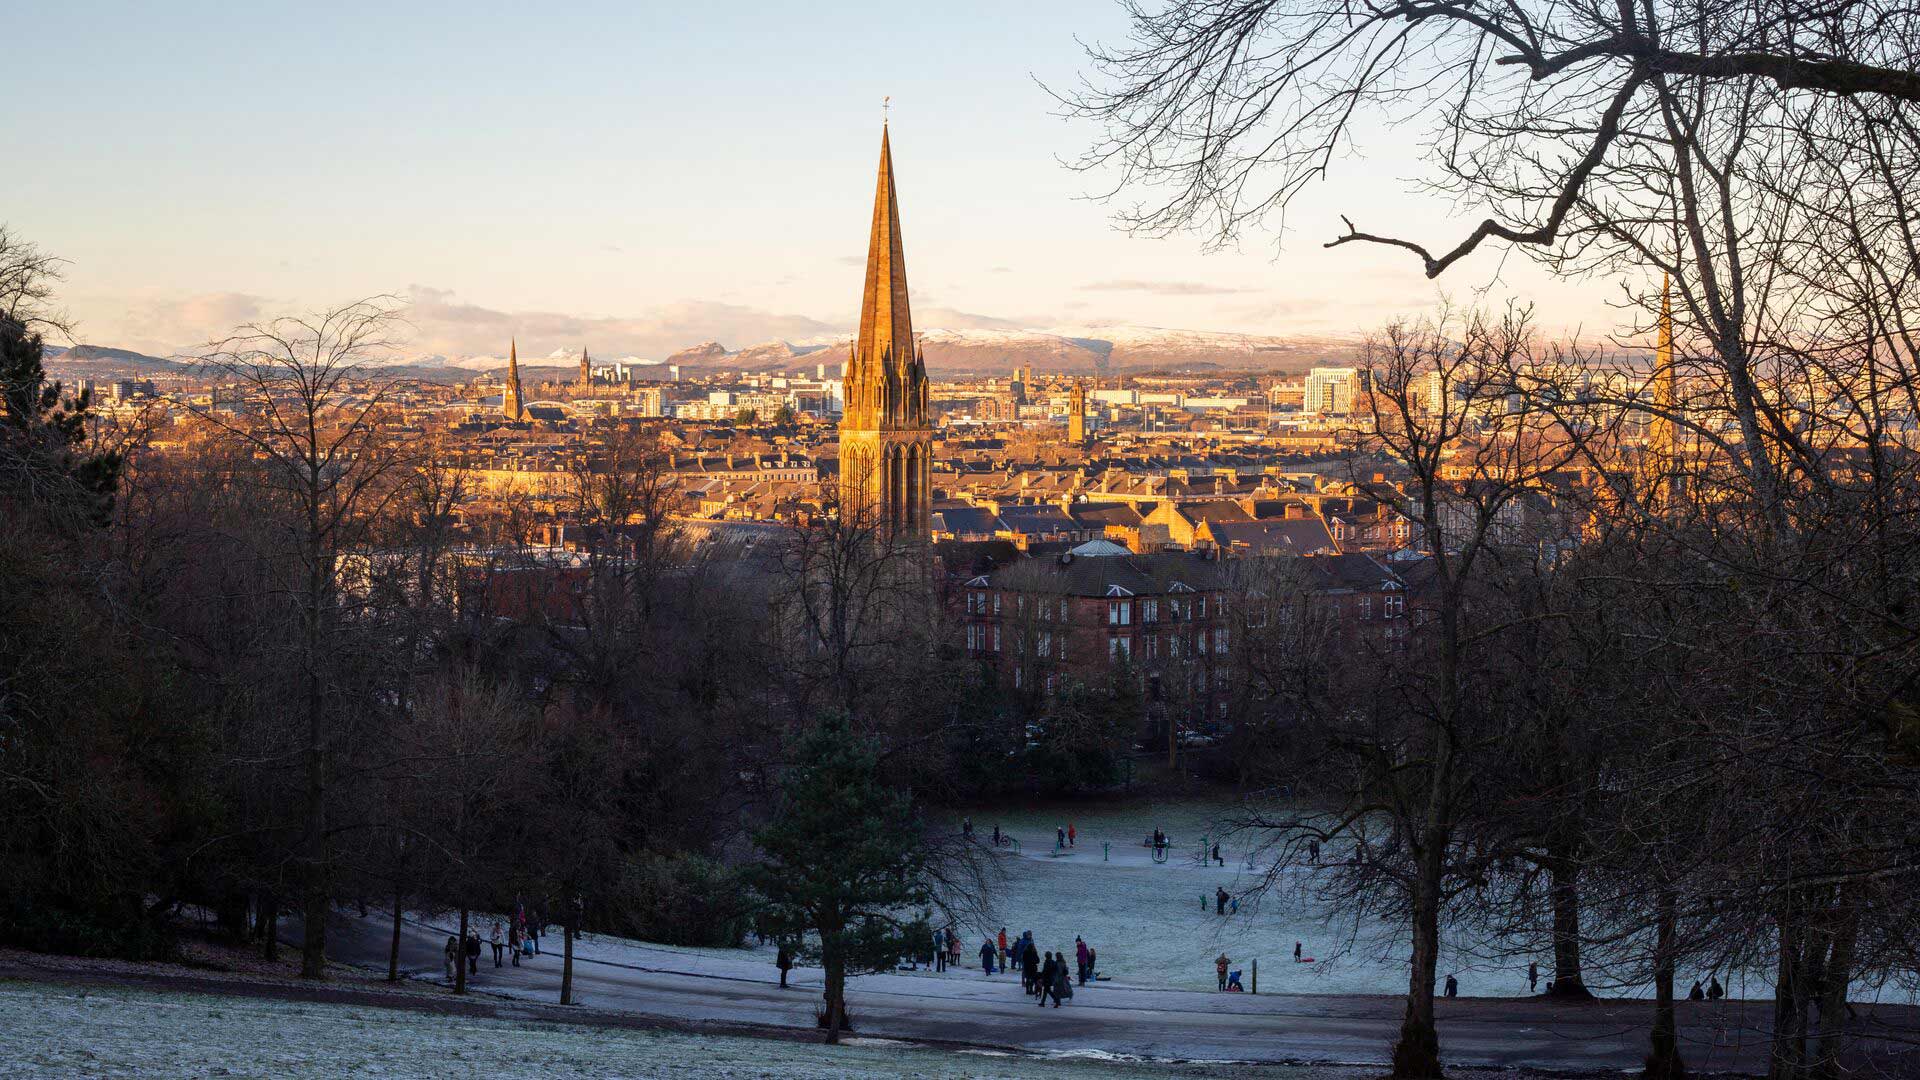 Queens Park in Glasgow dusted with snow during winter